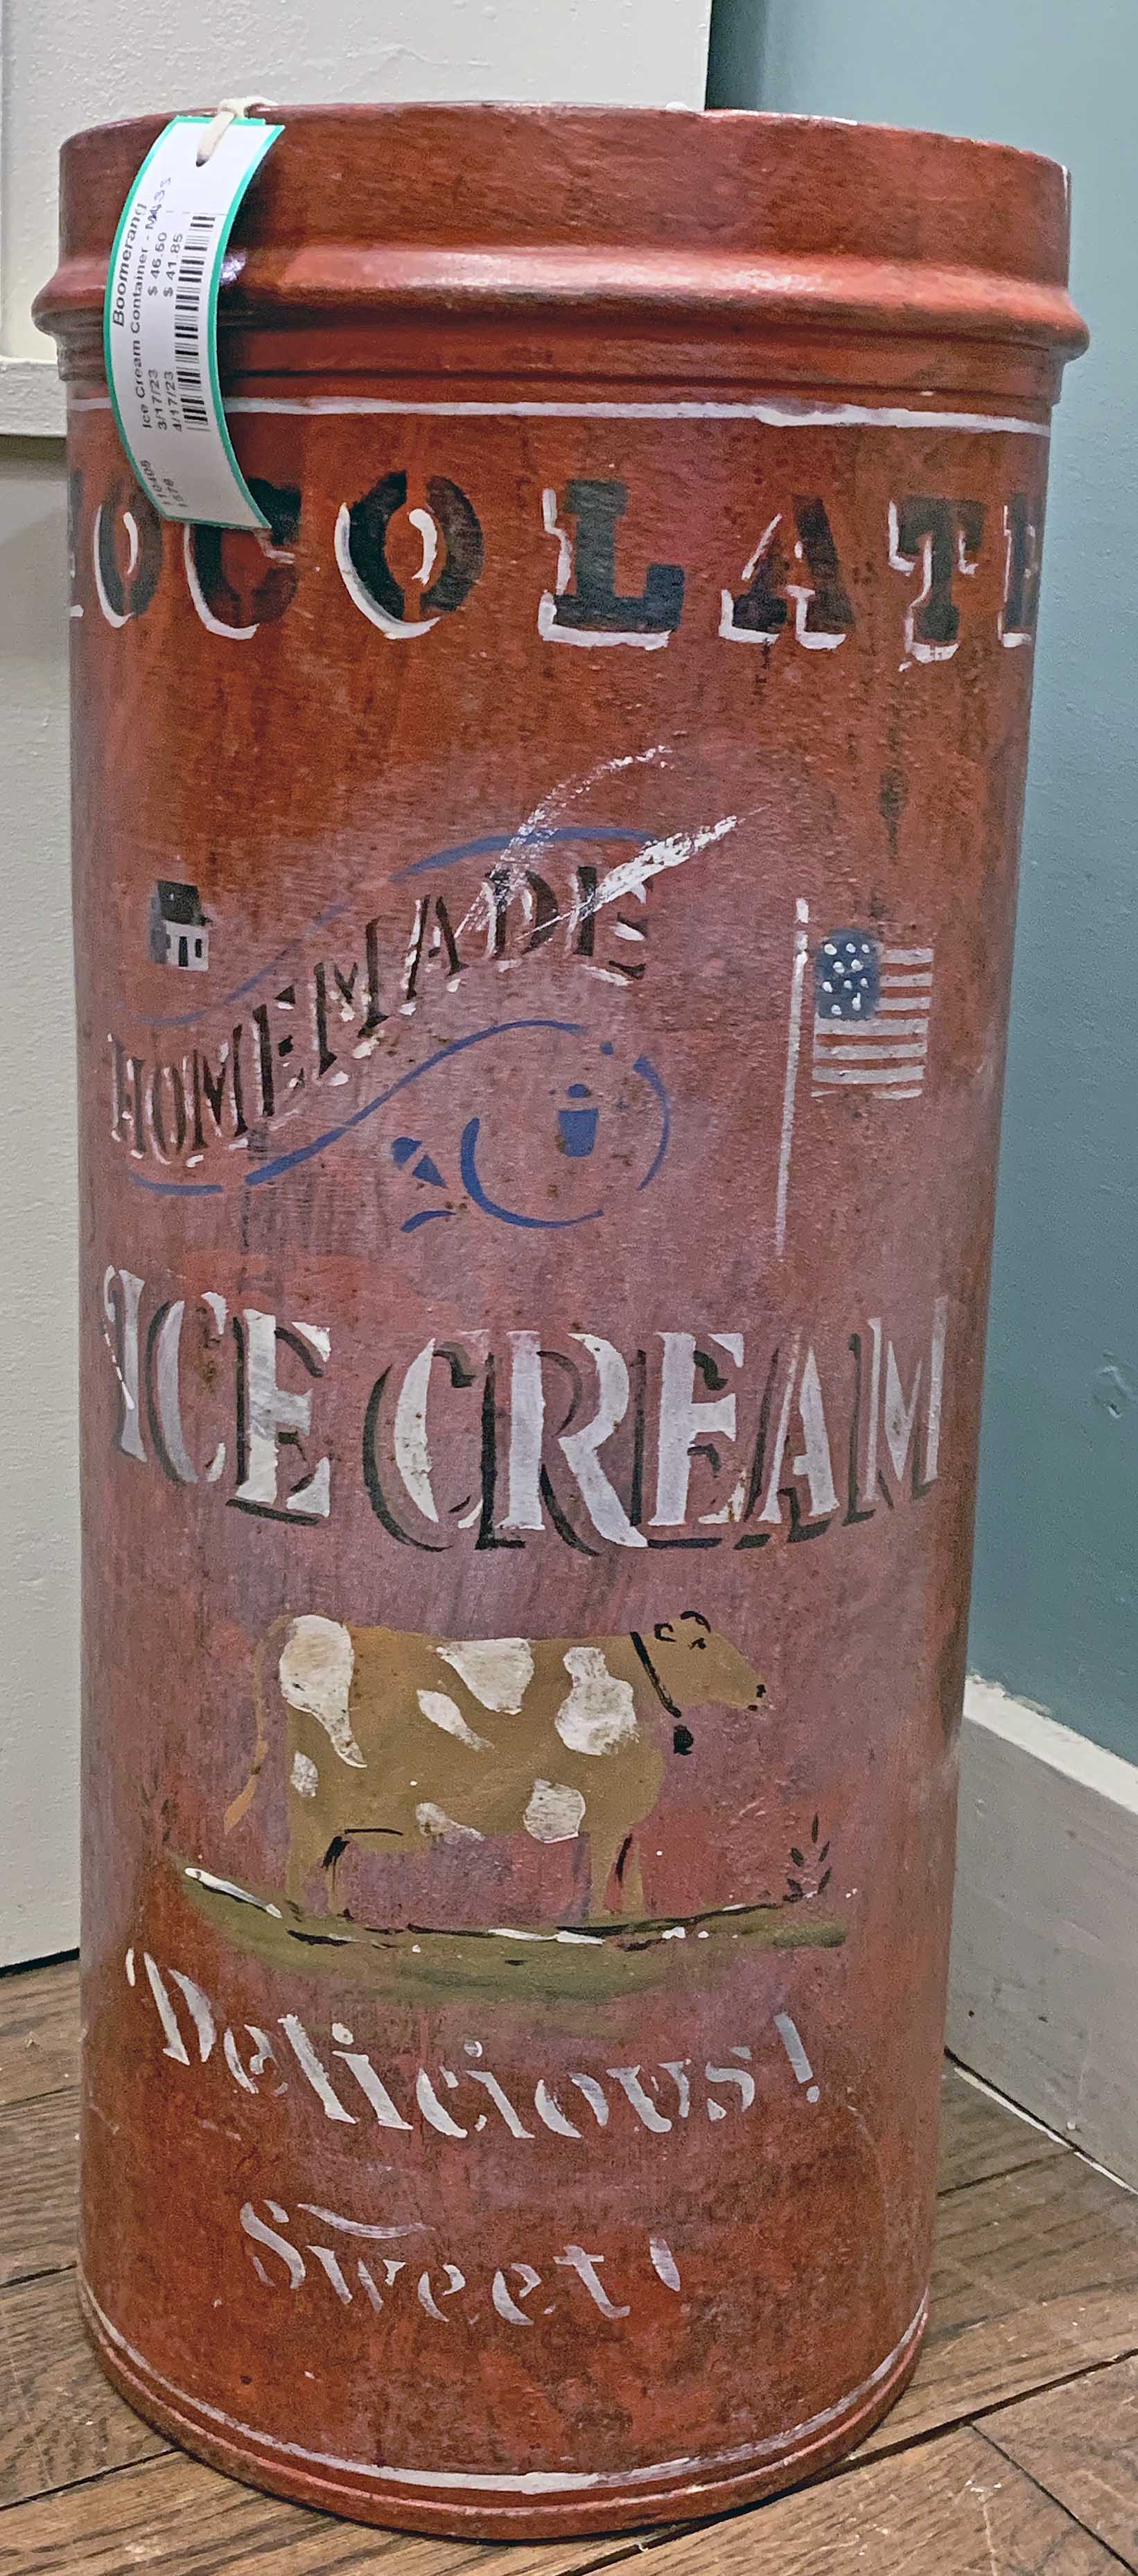 Vintage Ice Cream Container
Nice Graphics!
Sharon, Mass
21 Inches Tall